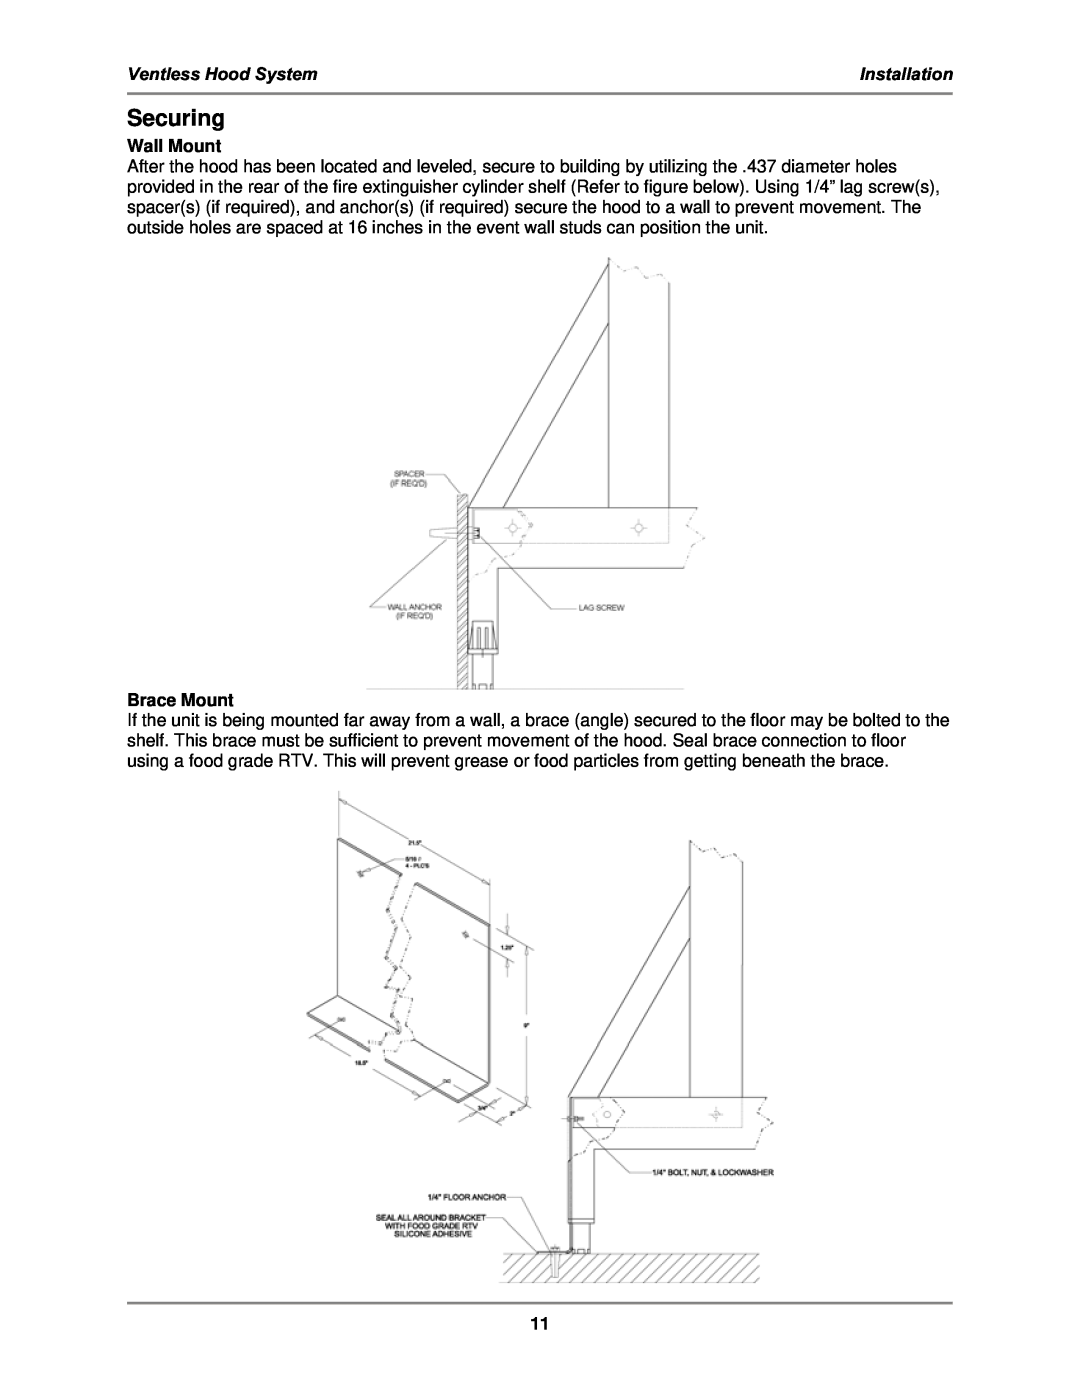 Bakers Pride Oven FH-28 operation manual Securing, Wall Mount, Brace Mount, Ventless Hood System, Installation 